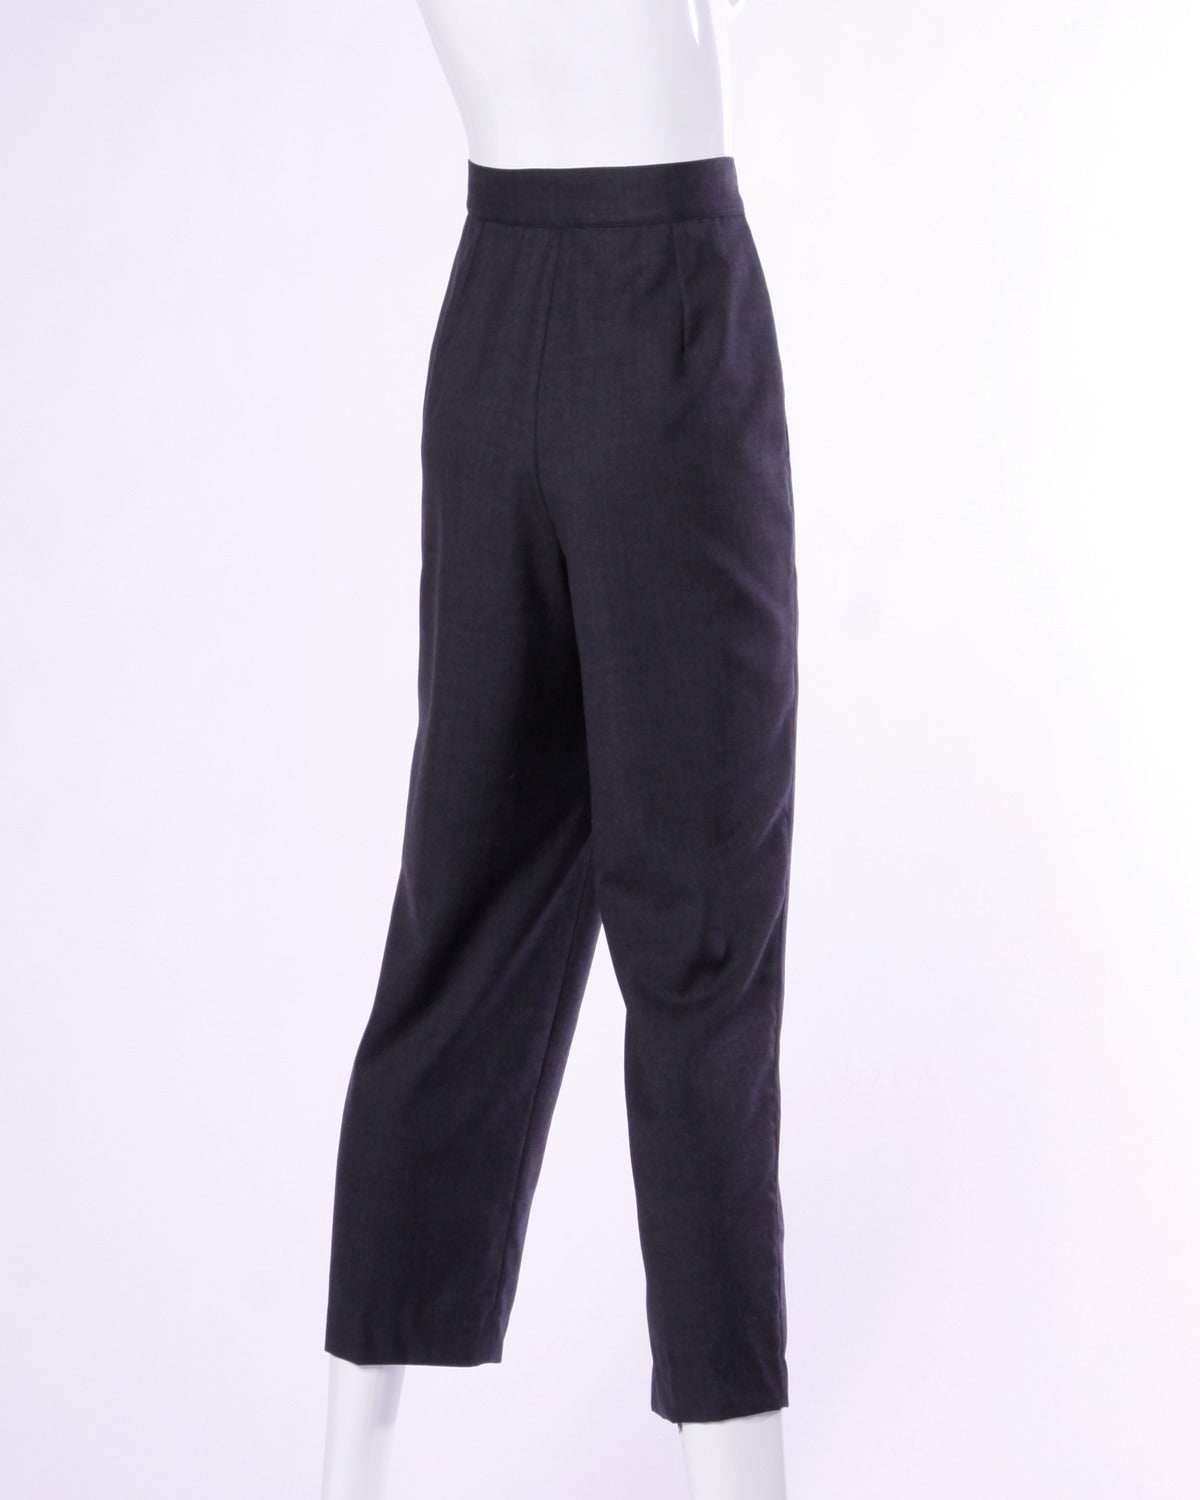 Simple and chic vintage dark gray trousers with pleated front by Gianni Versace.

Details:

Unlined
Side Pockets
Side Hook Closure
Marked Size: 44
Color: Dark Gray
Fabric: 100% Virgin Wool
Label: Gianni Versace

Measurements:

Waist: